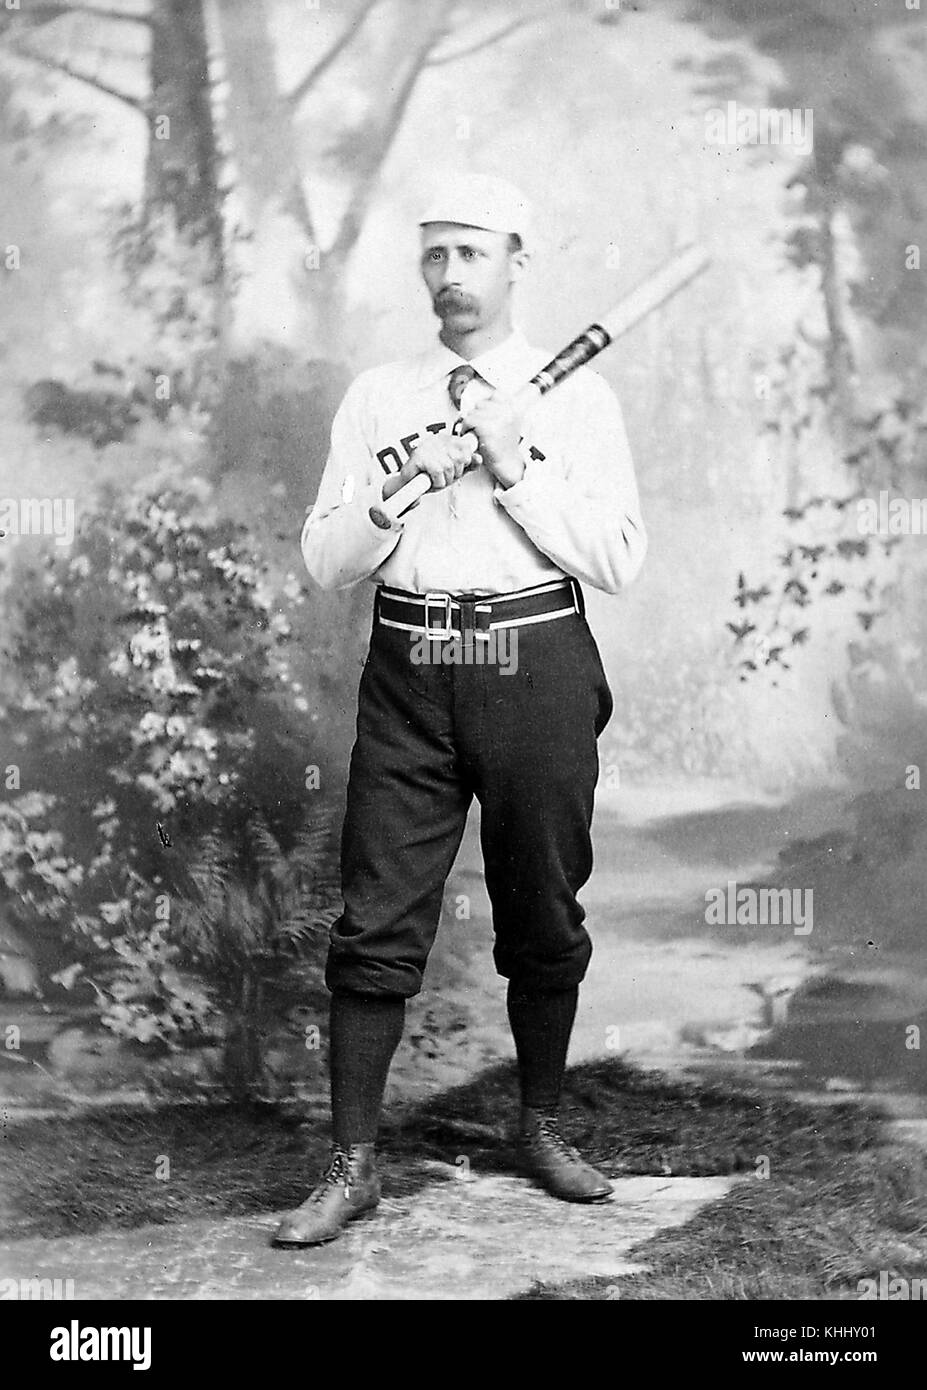 Portrait of Deacon White, American baseball player who was one of the principal stars during the first two decades of the sport's professional era, caught more games than any other player during the 1870s, and was a major figure on five consecutive championship teams, posing in Detroit Wolverines uniform, photograph by FN Thomlinson, 1888. From the New York Public Library. Stock Photo